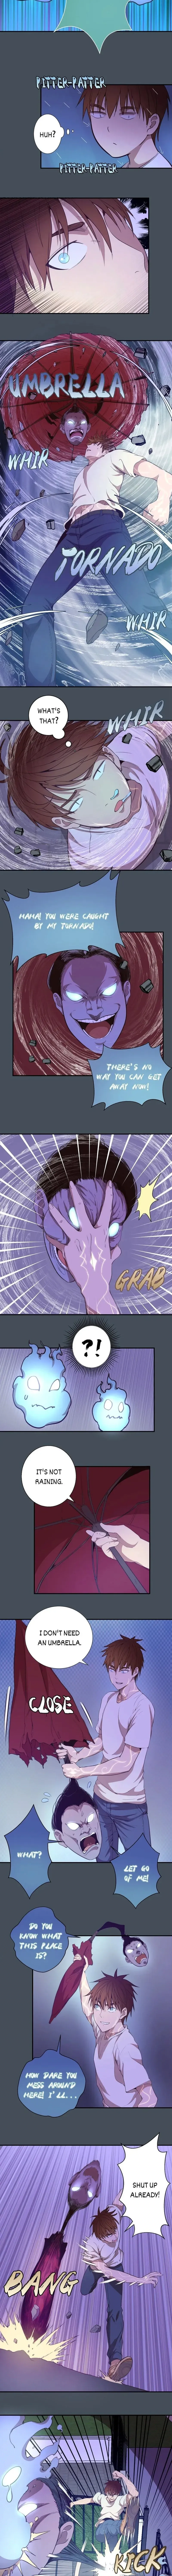 Ghost Emperor Chapter 30 page 4